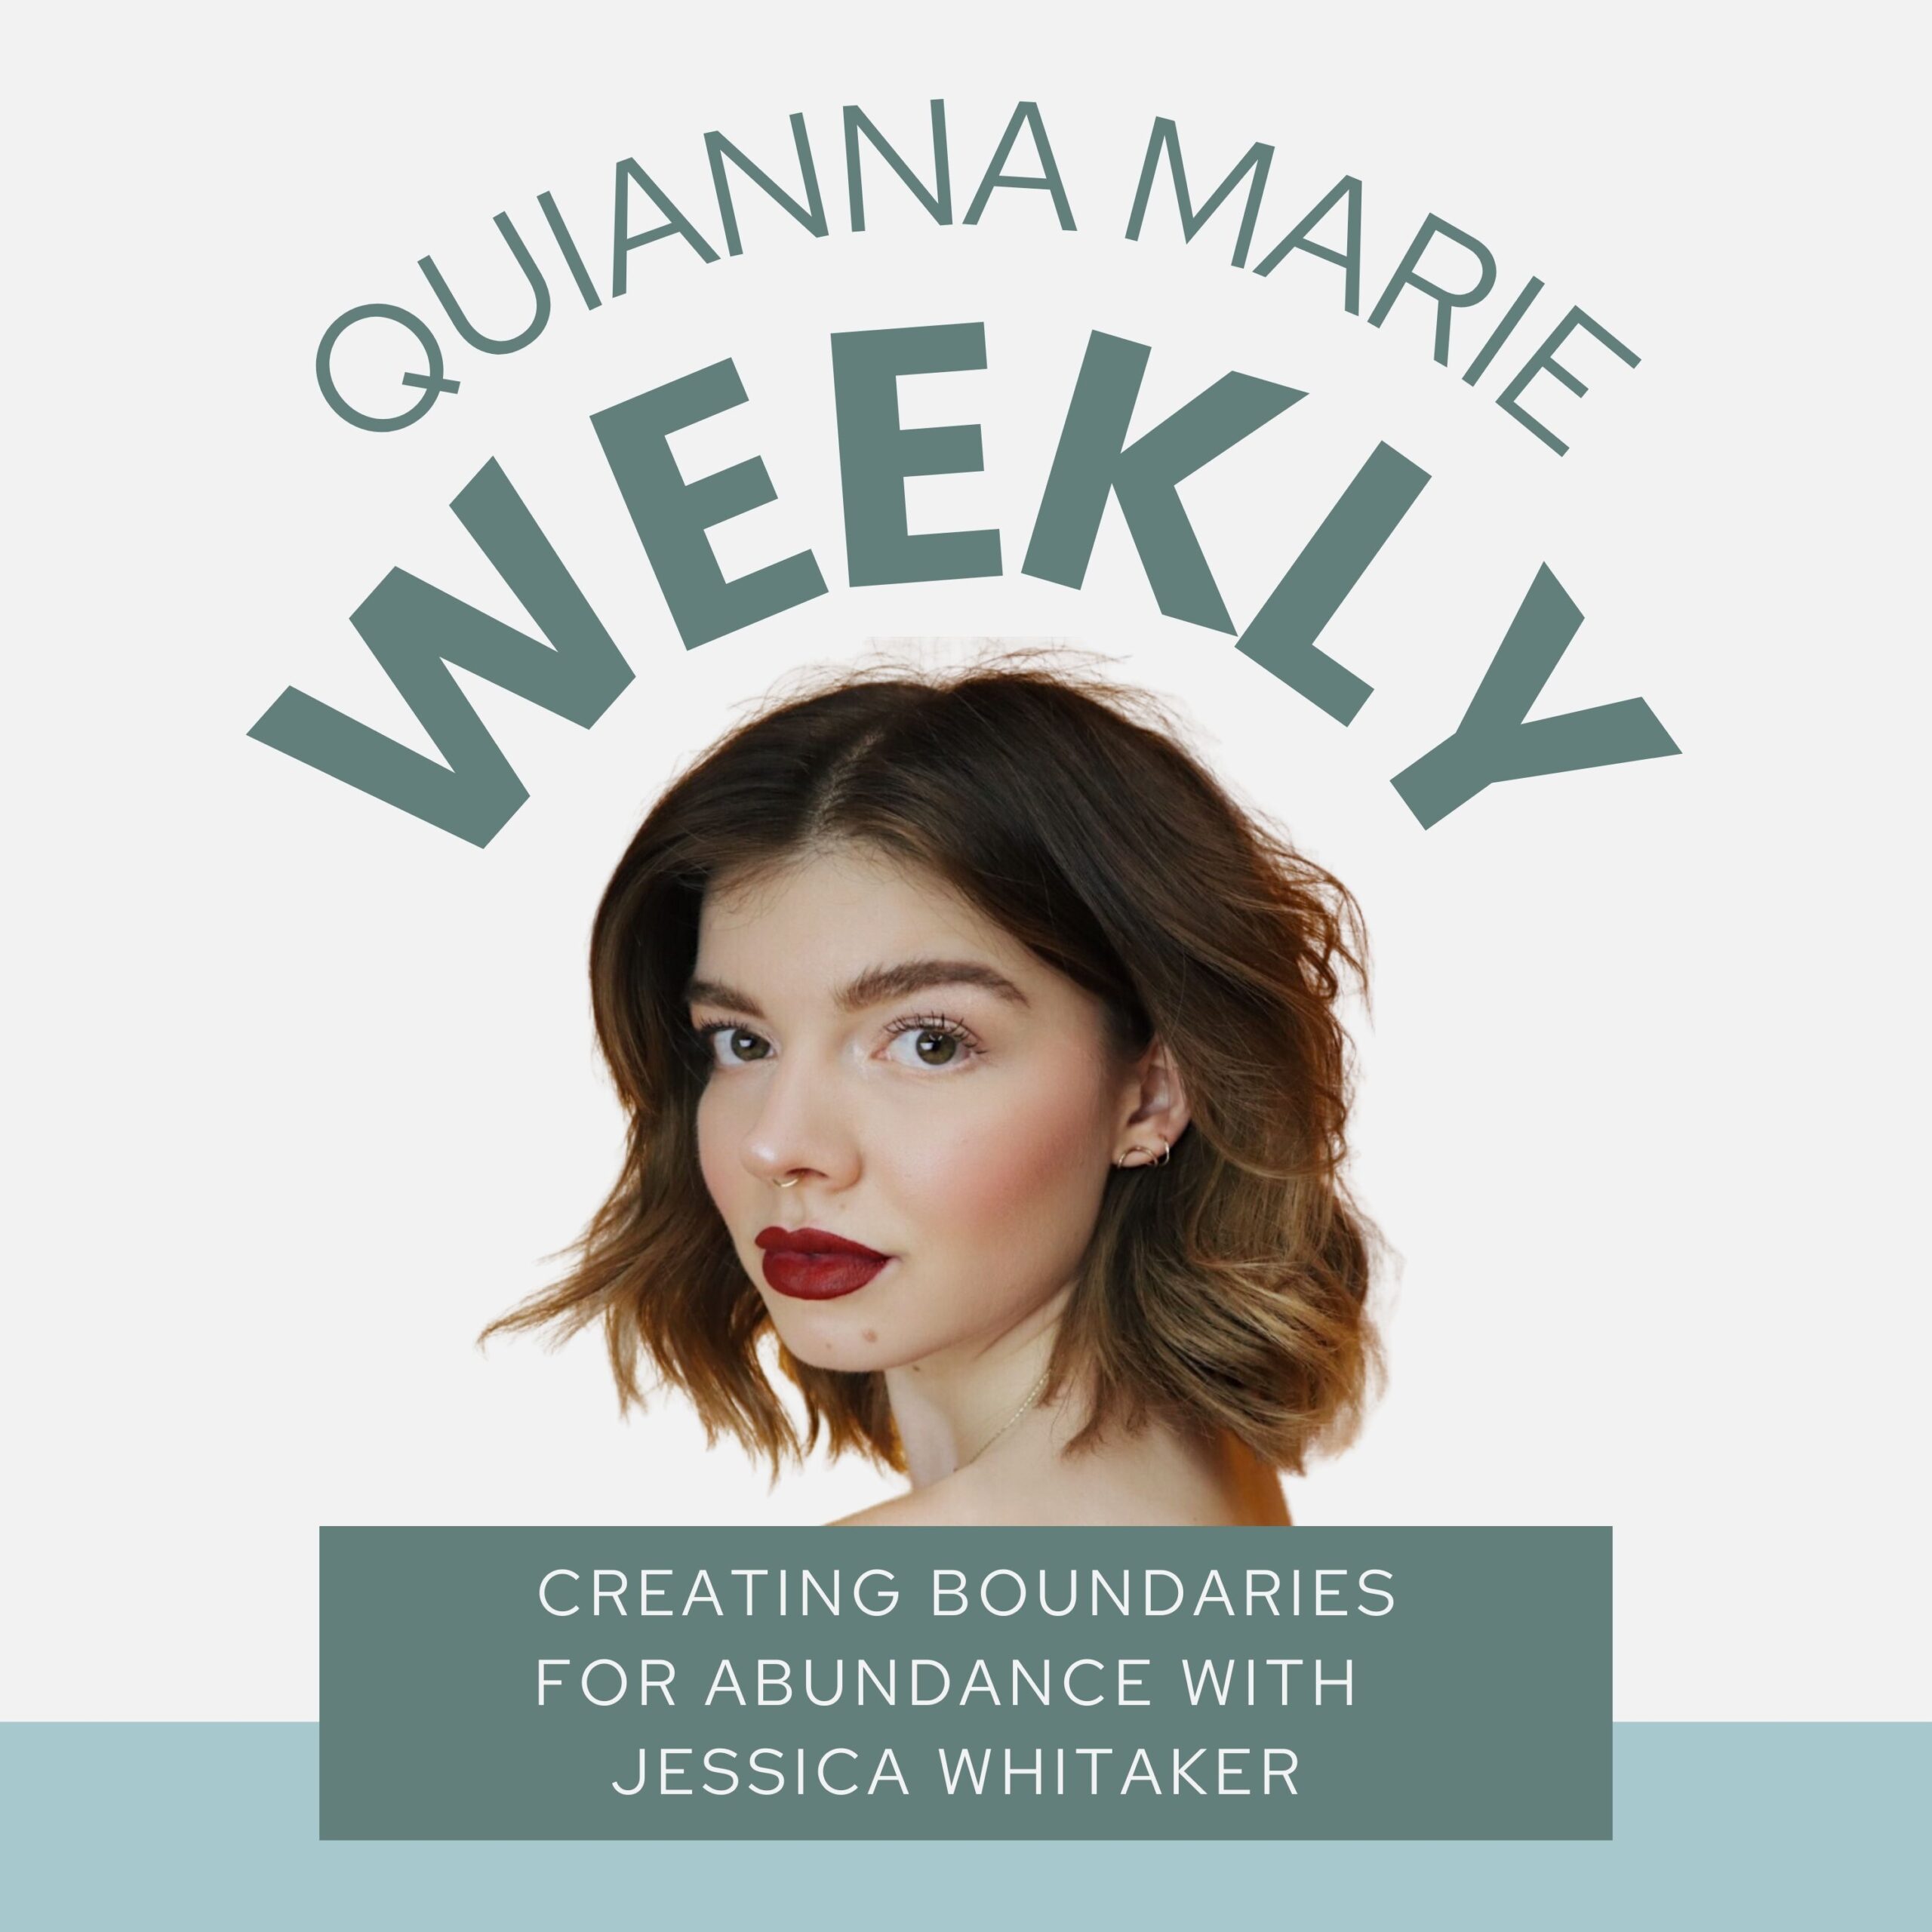 Photography business education and marketing growth with Jessica Whitaker on Quianna Marie Weekly